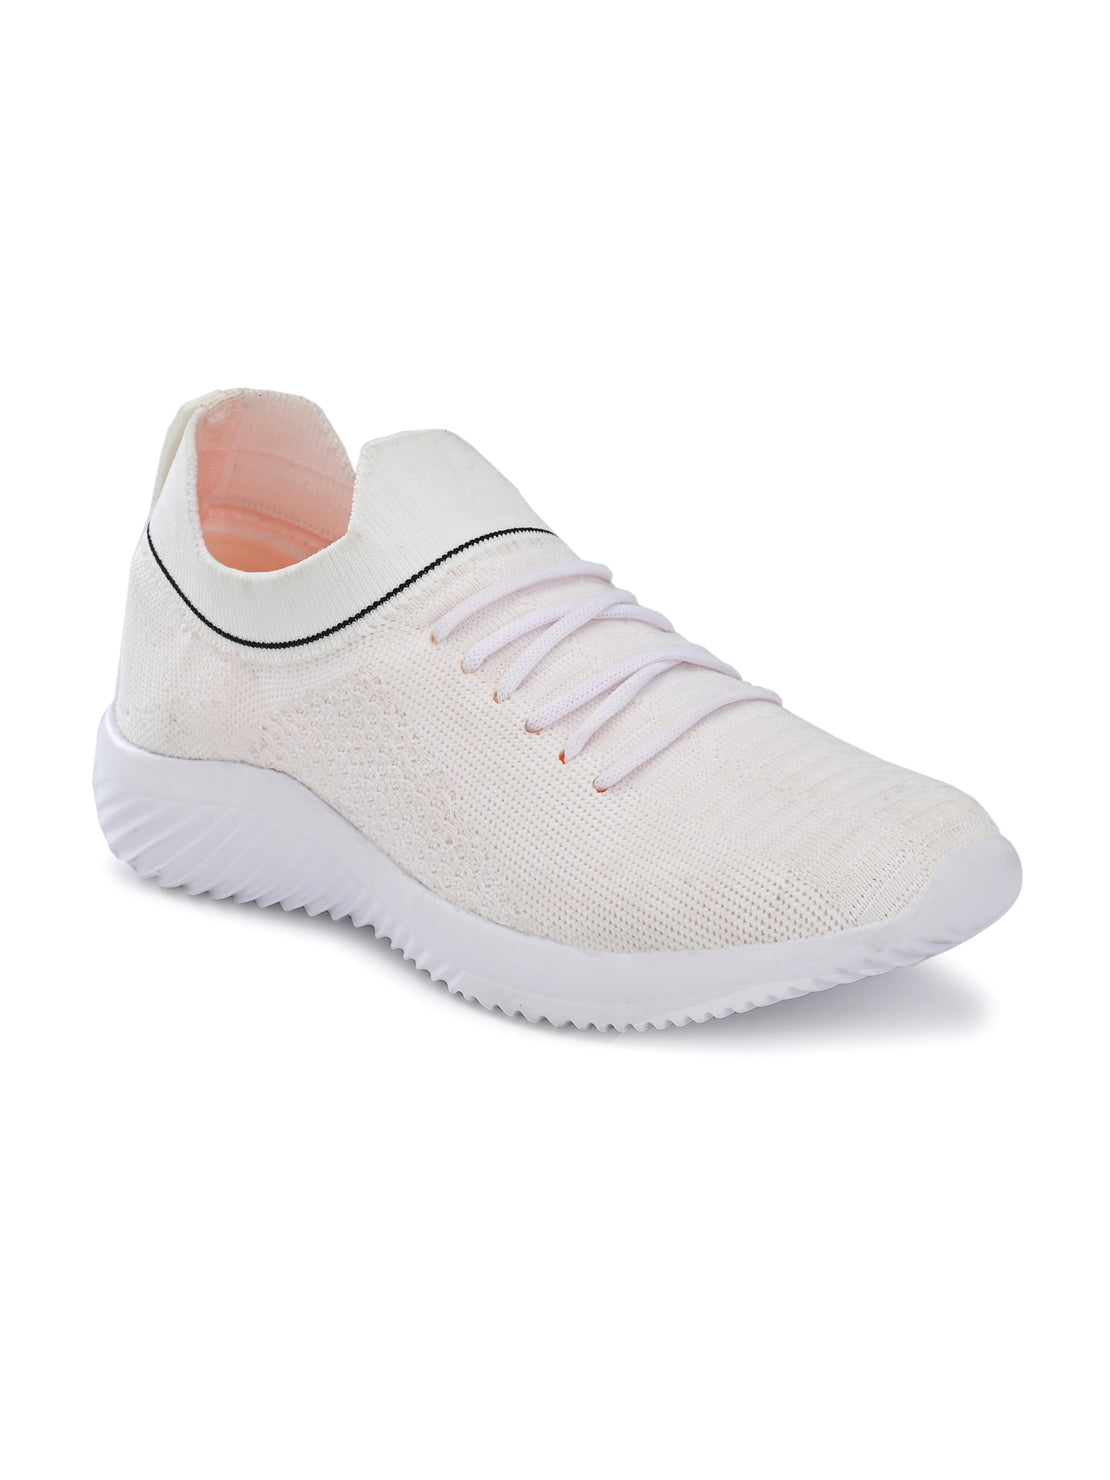 Hirolas® Women White Casual Running Walking Jogging Gym comfortable Athletic Lace-Up Sports_Shoes (HRLWF01WHT)